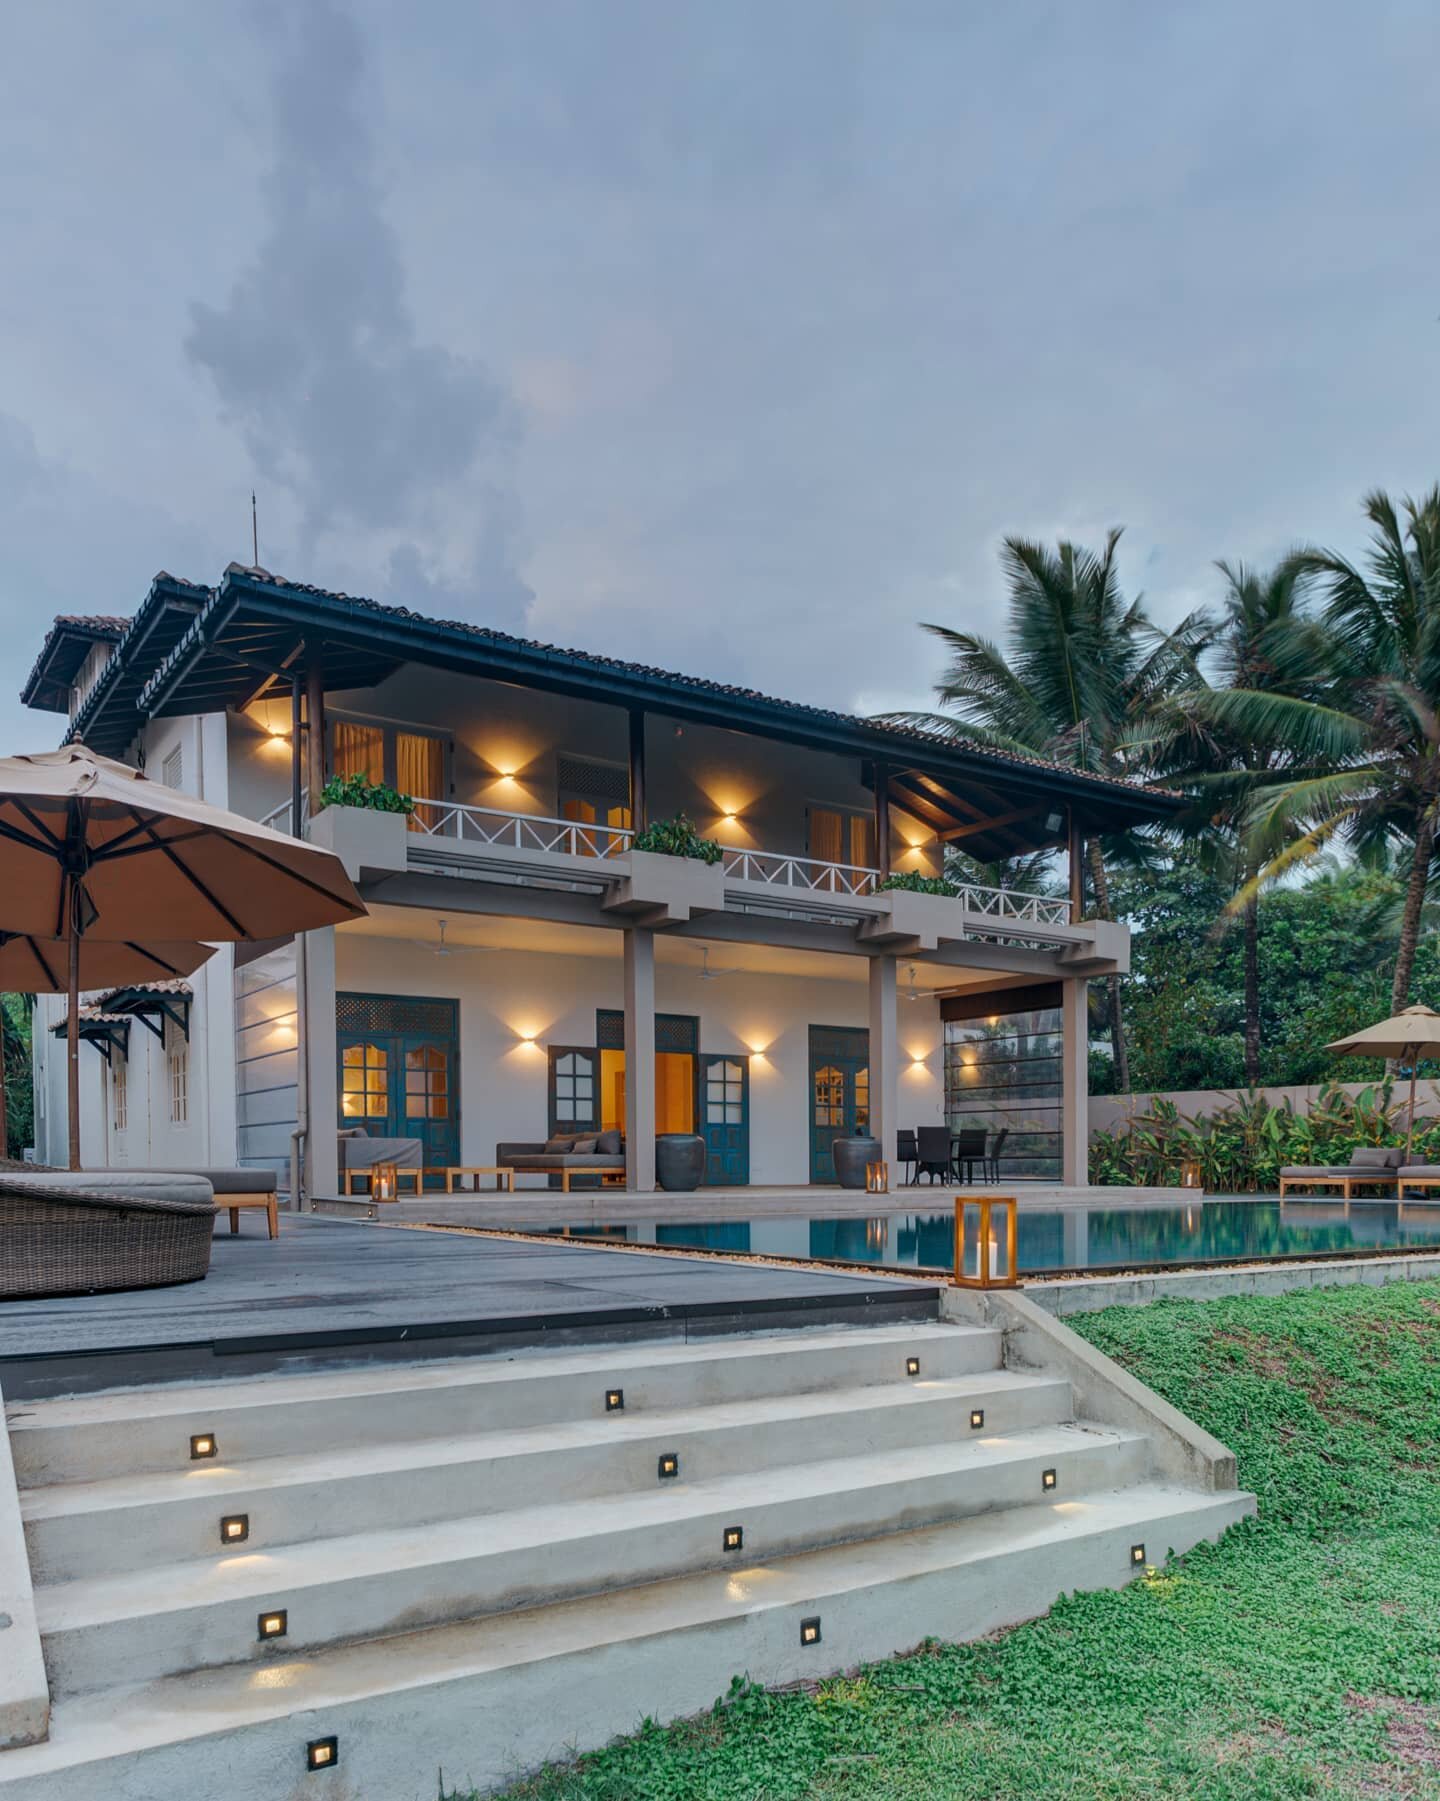 Gloomy weather or bright and sunny days, there's plenty to do at our On The Rocks villa in Unawatuna ☀️ With ample garden space opening up to the Dalawella Beach, a private pool surrounded by comfy sunloungers and a doting team to spoil you with scru